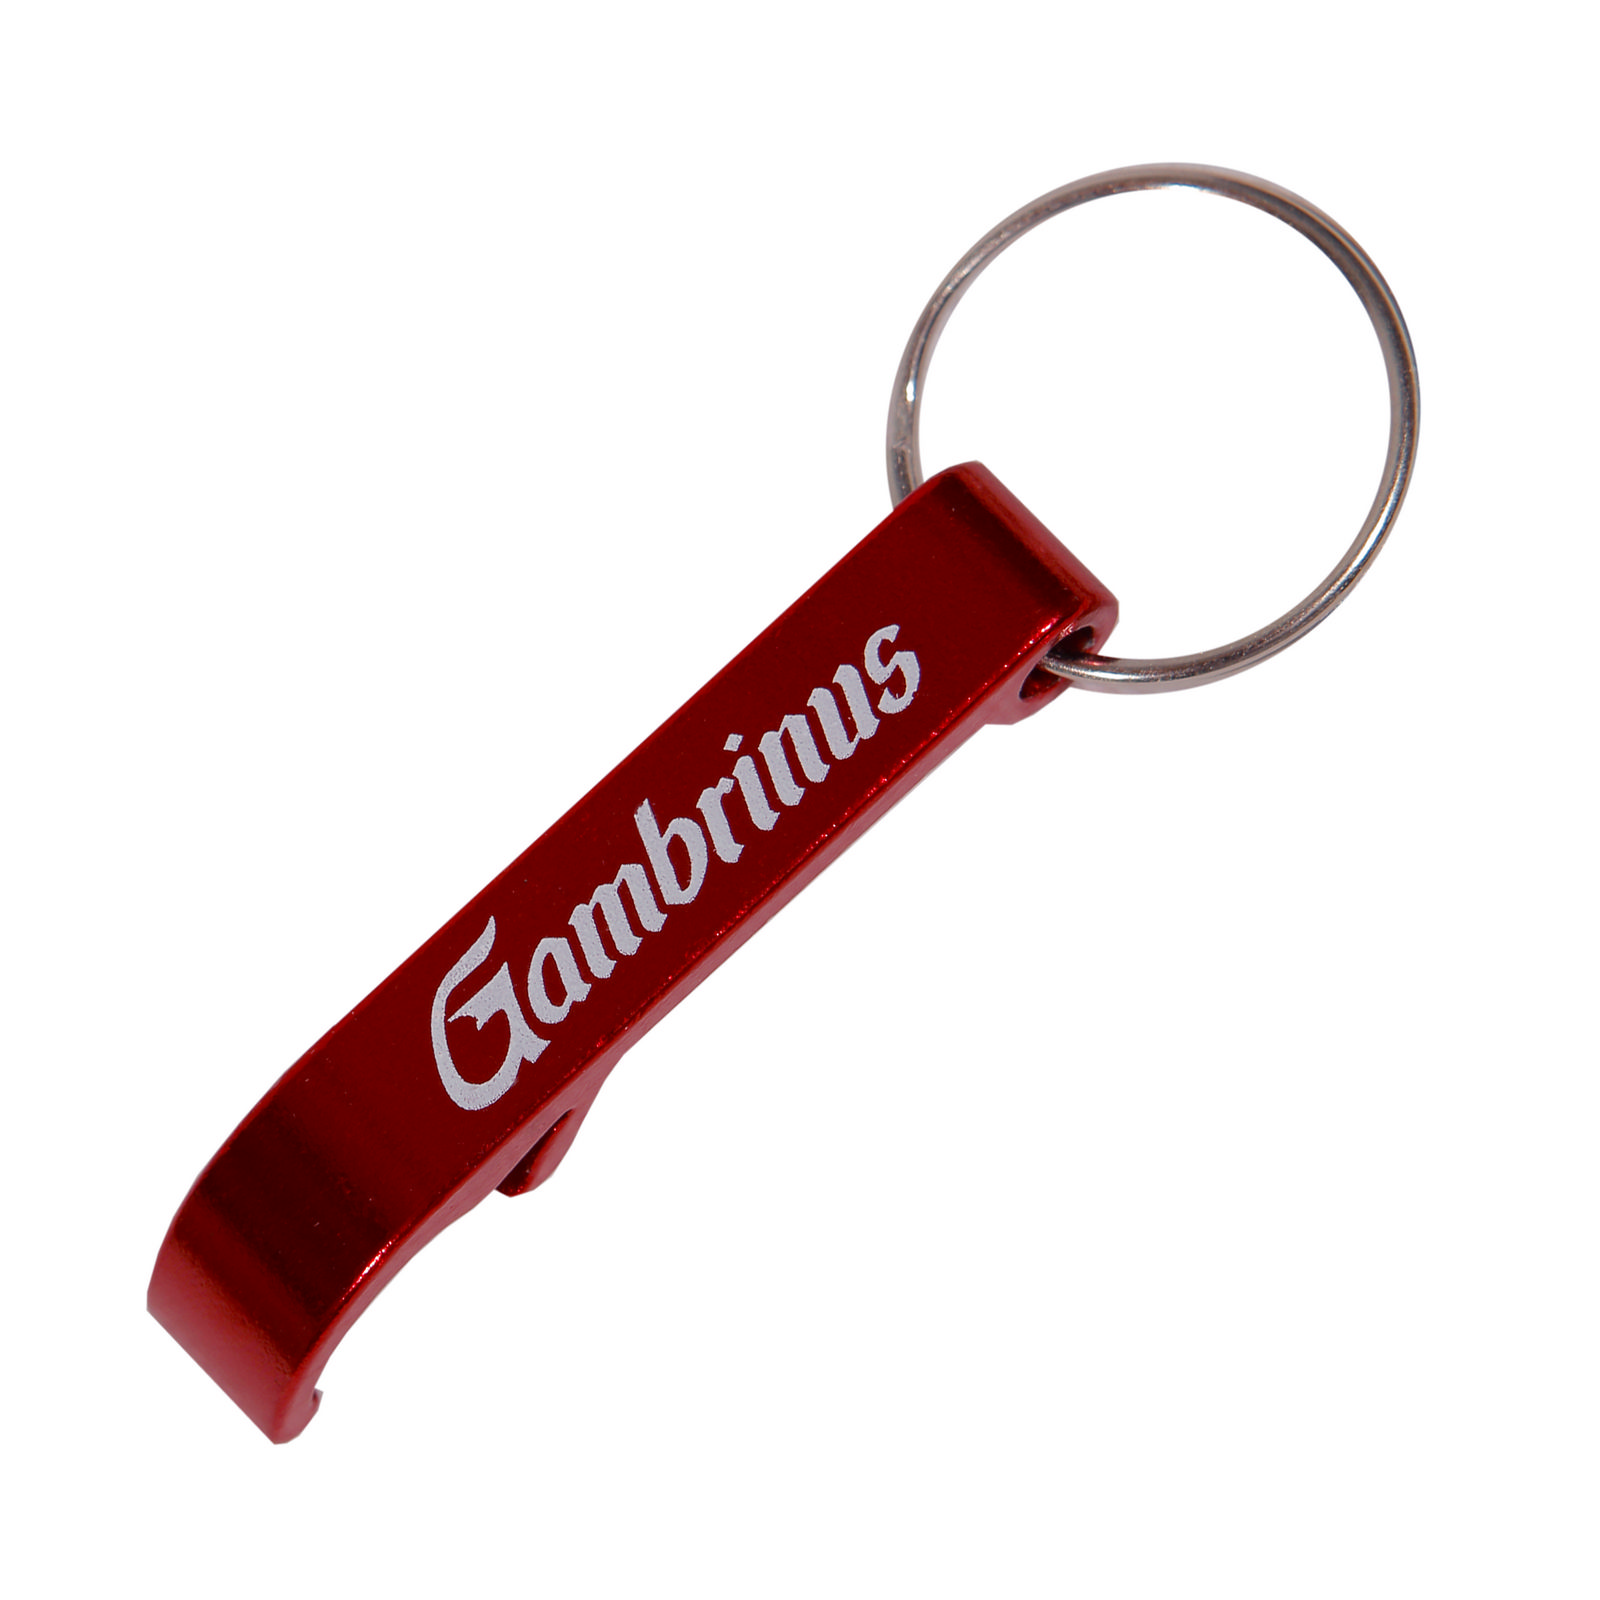 Key chain with a Gambrinus opener